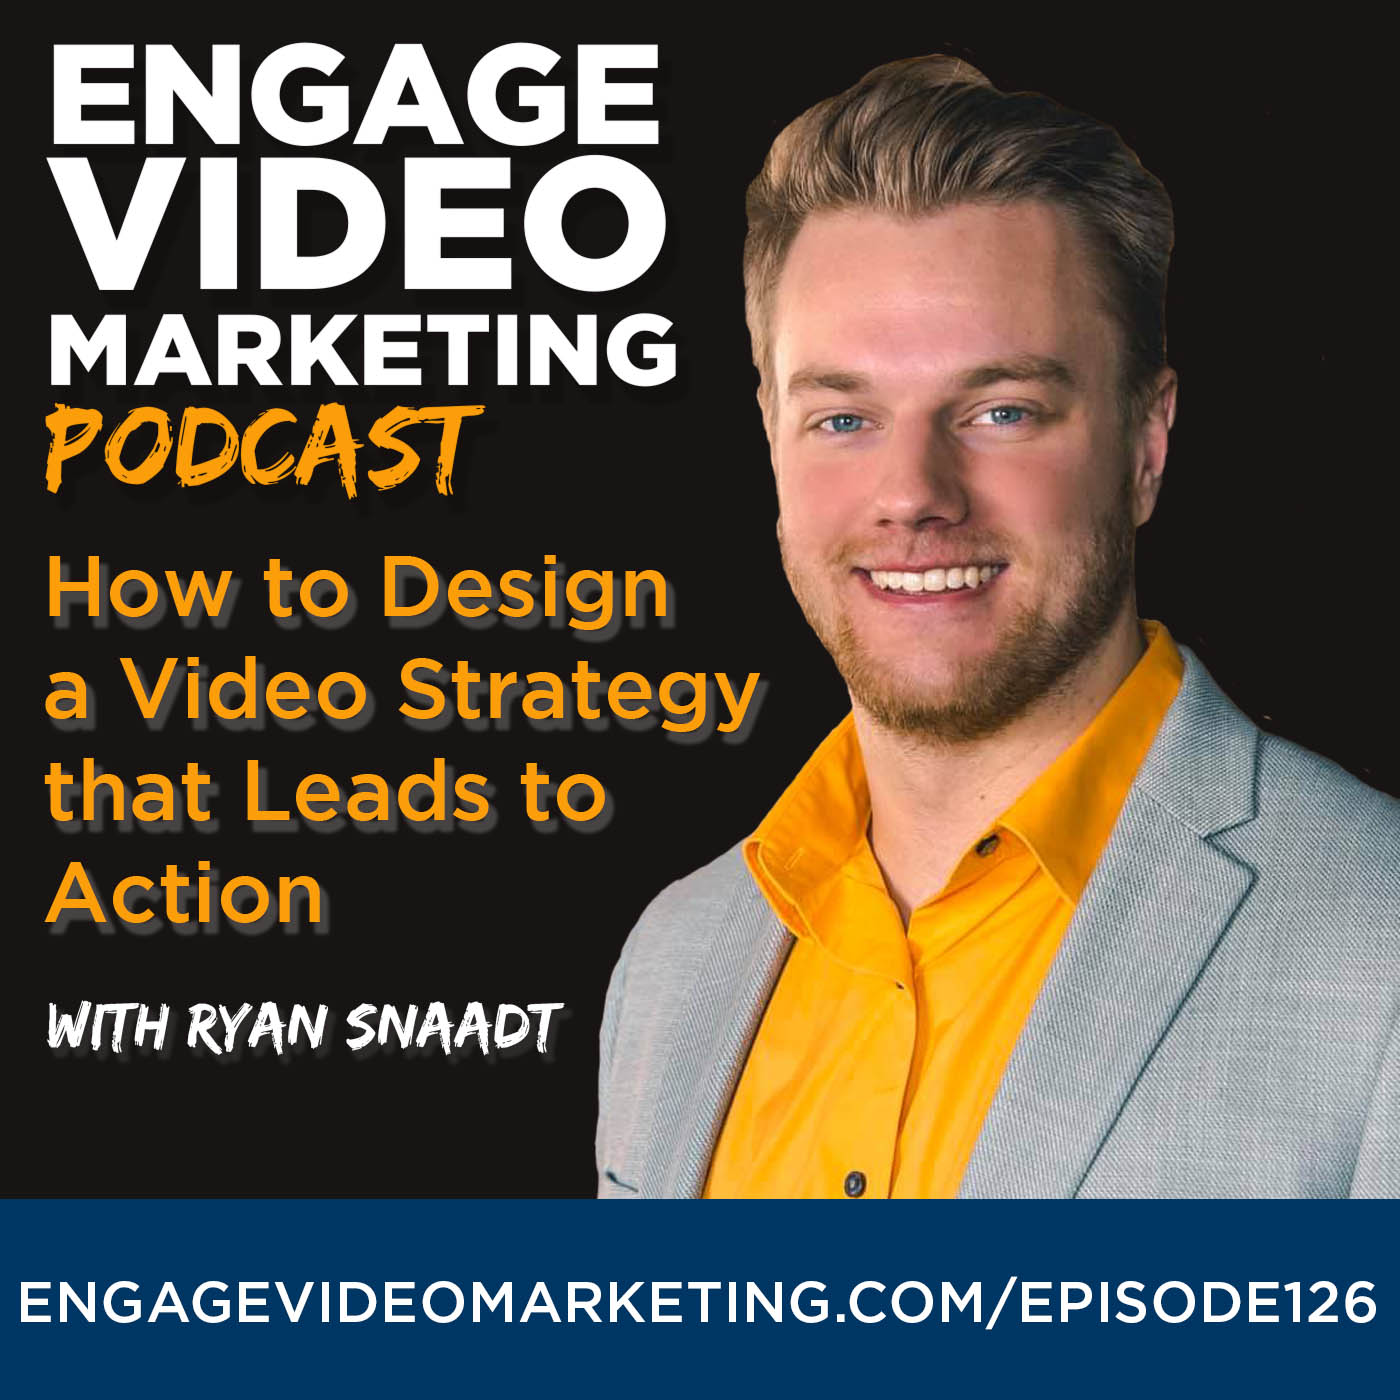 How to Design a Video Strategy that Leads to Action with Ryan Snaadt